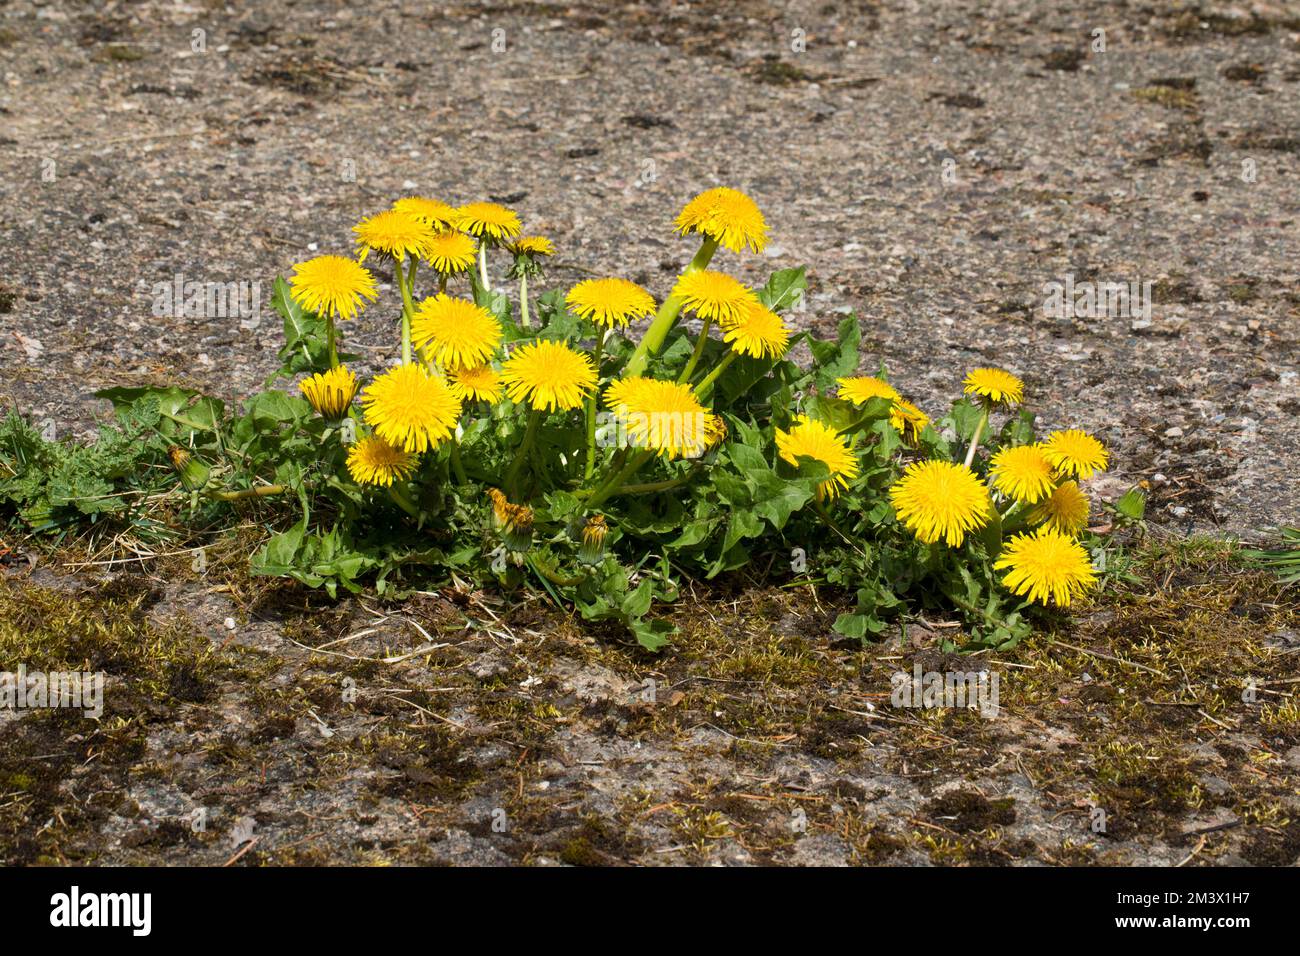 Dandelions (Taraxacum officinale agg.) growing and flowering through concrete. Powys, Wales. April. Stock Photo